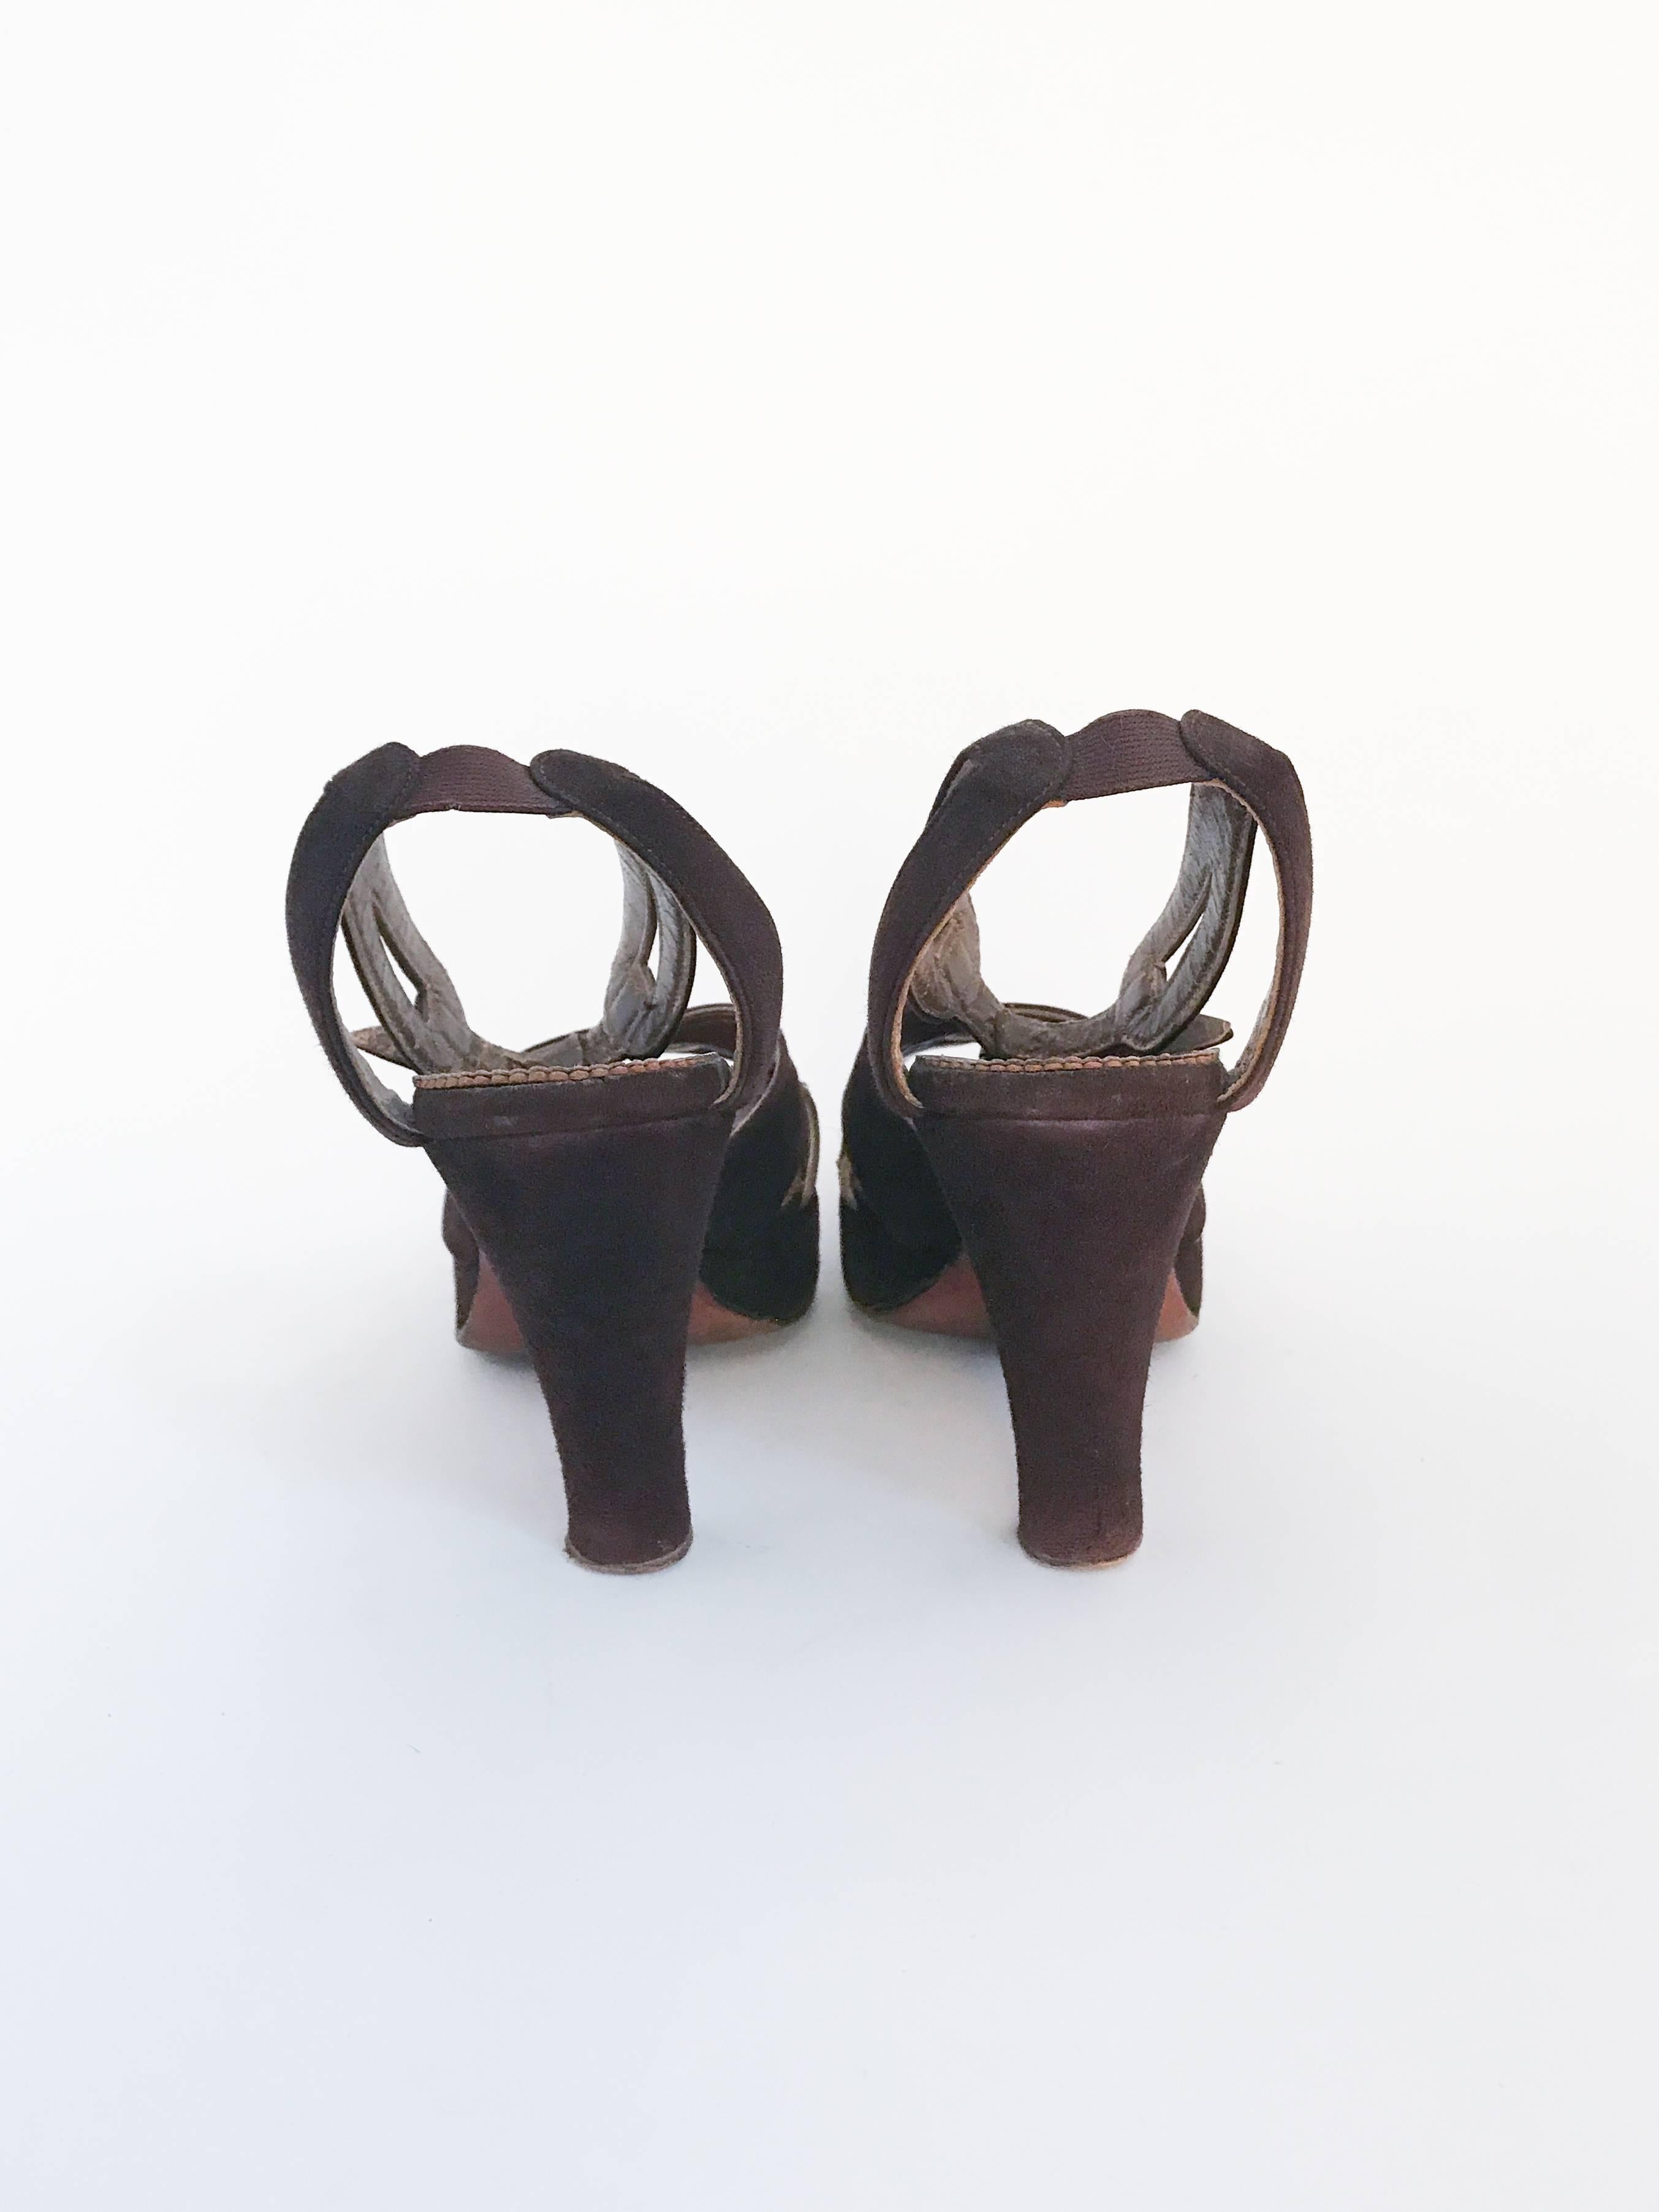 Women's or Men's 1947 Brown Suede Heels With Cut-out Accents For Sale